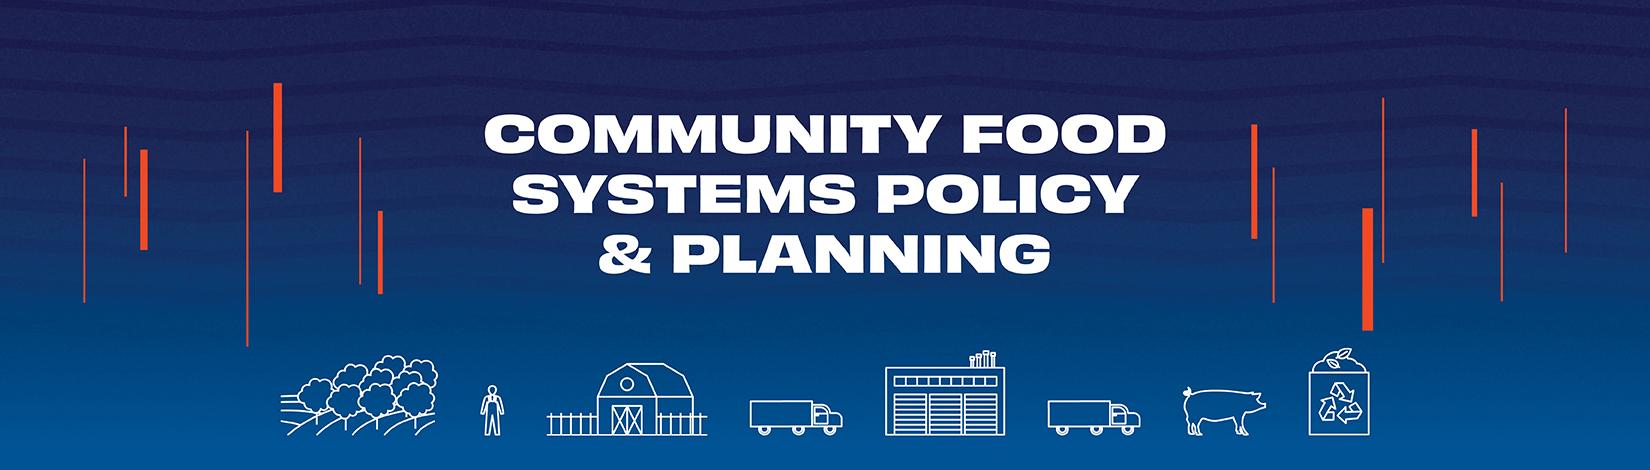 Community Food Systems Policy & Planning Banner